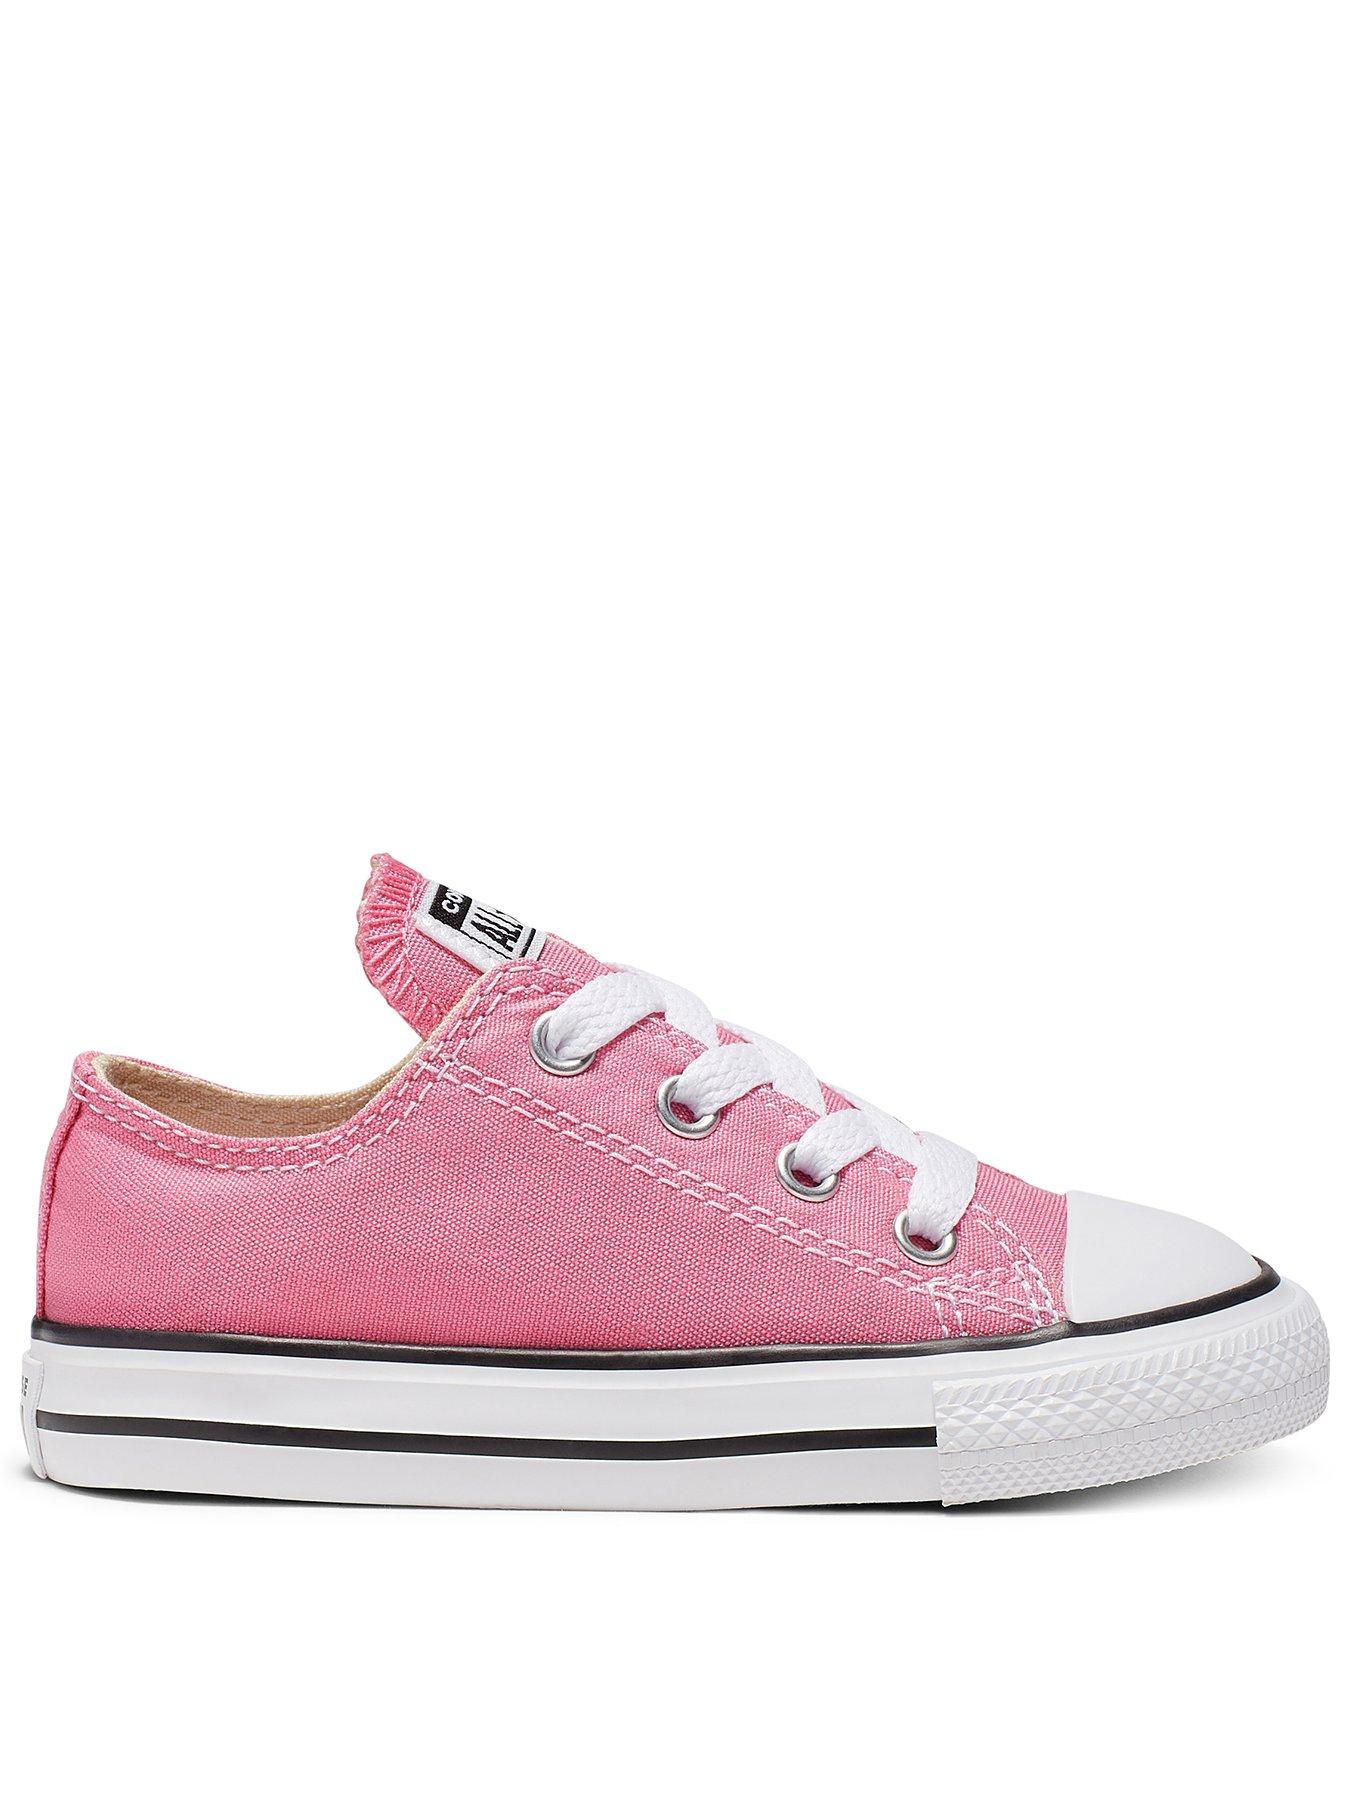 infant pink converse